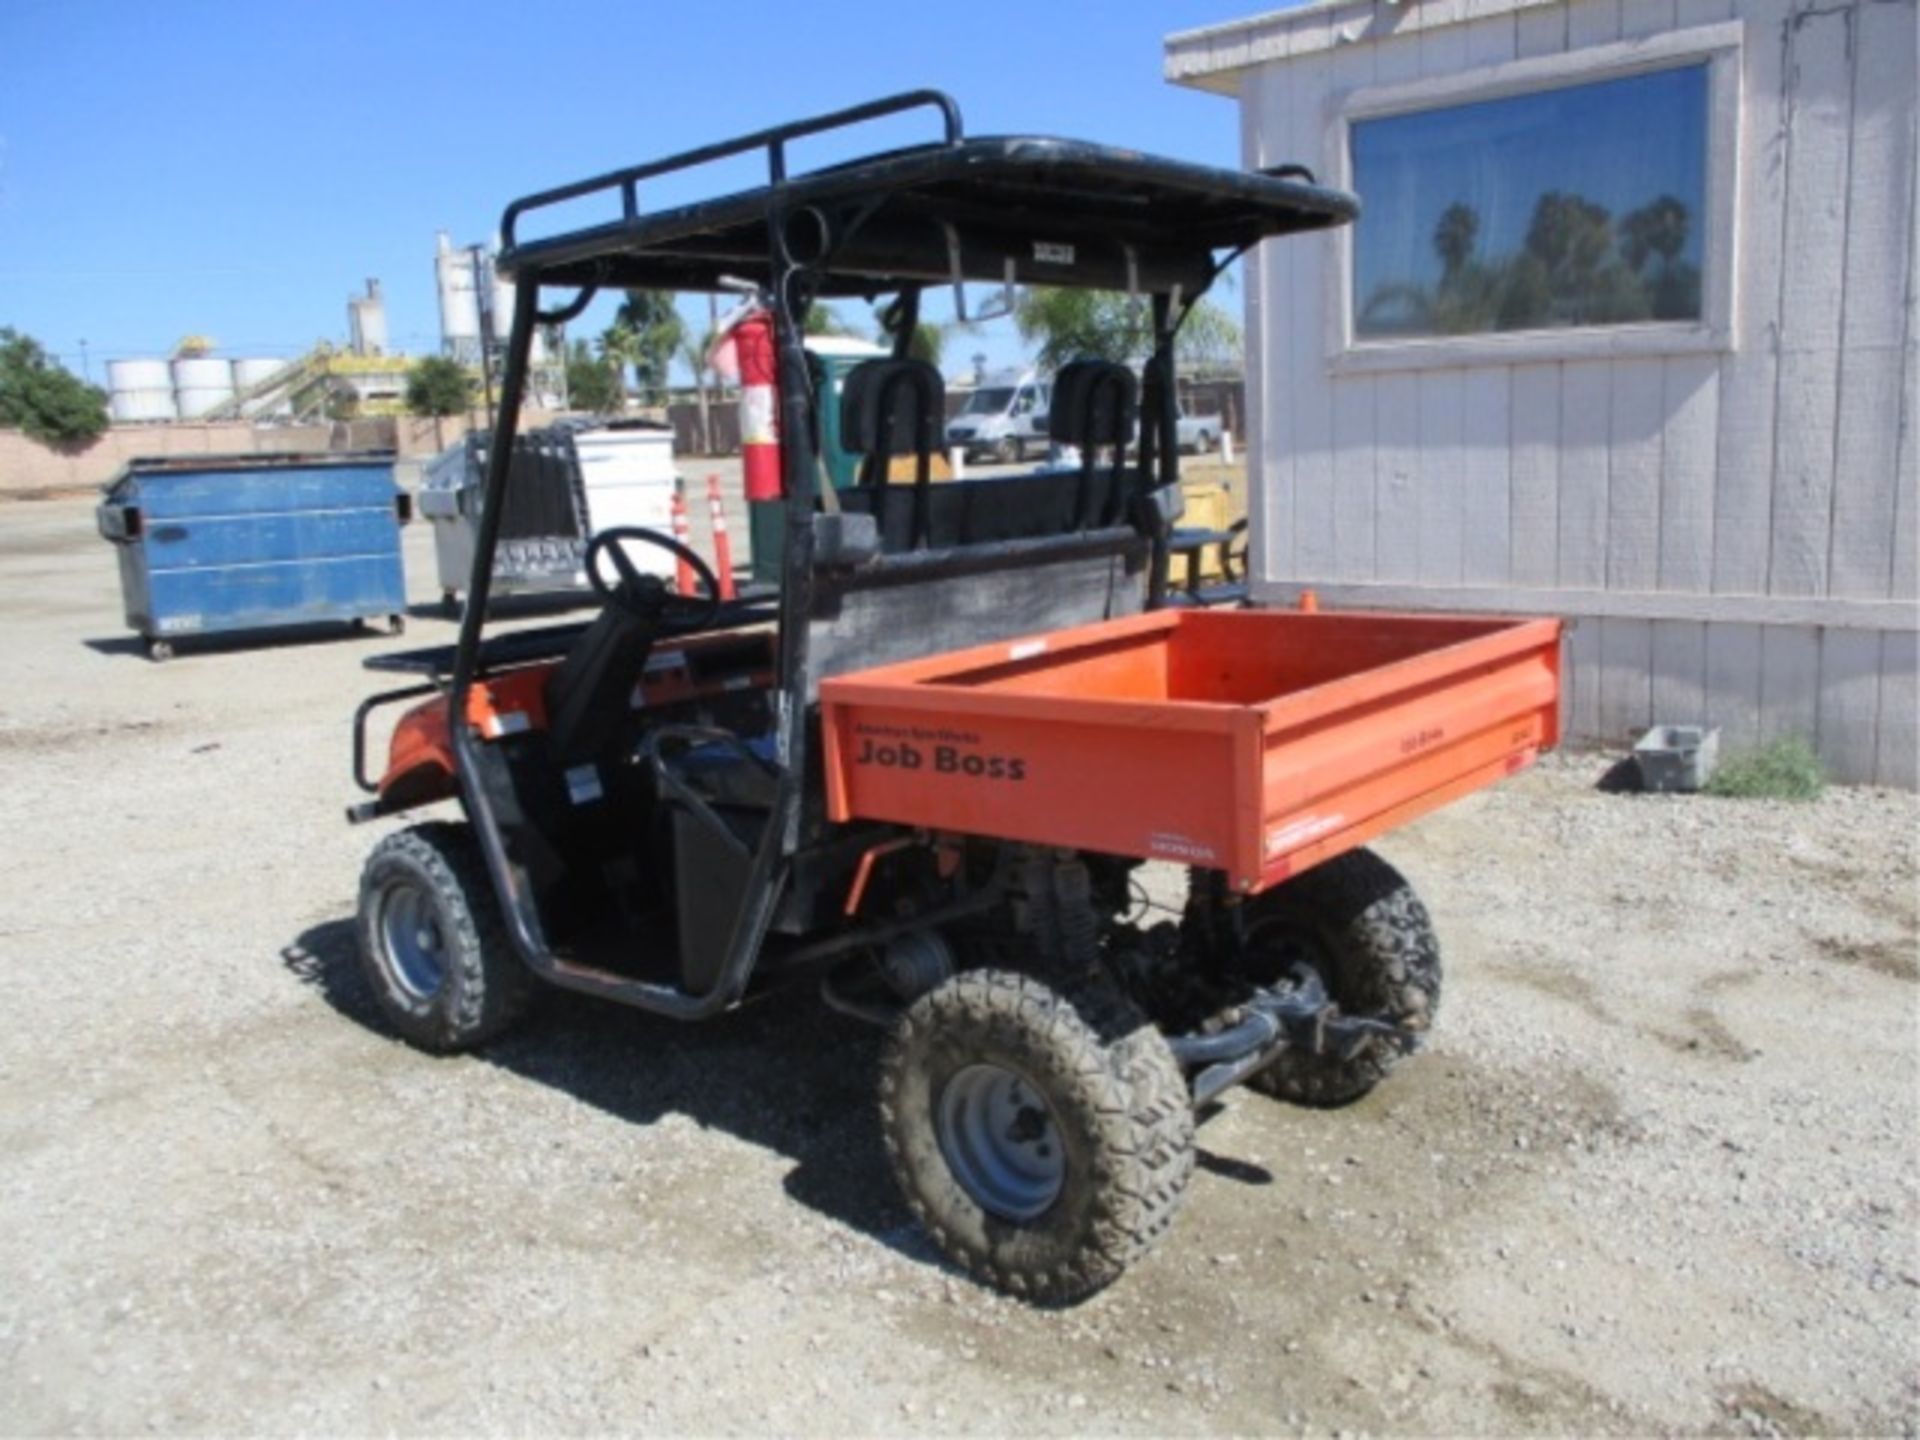 2008 American Sportworks Job Boss Utility Cart, Honda Gas, Rear Metal Dump Bed, Canopy, Tow Hitch, - Image 16 of 50